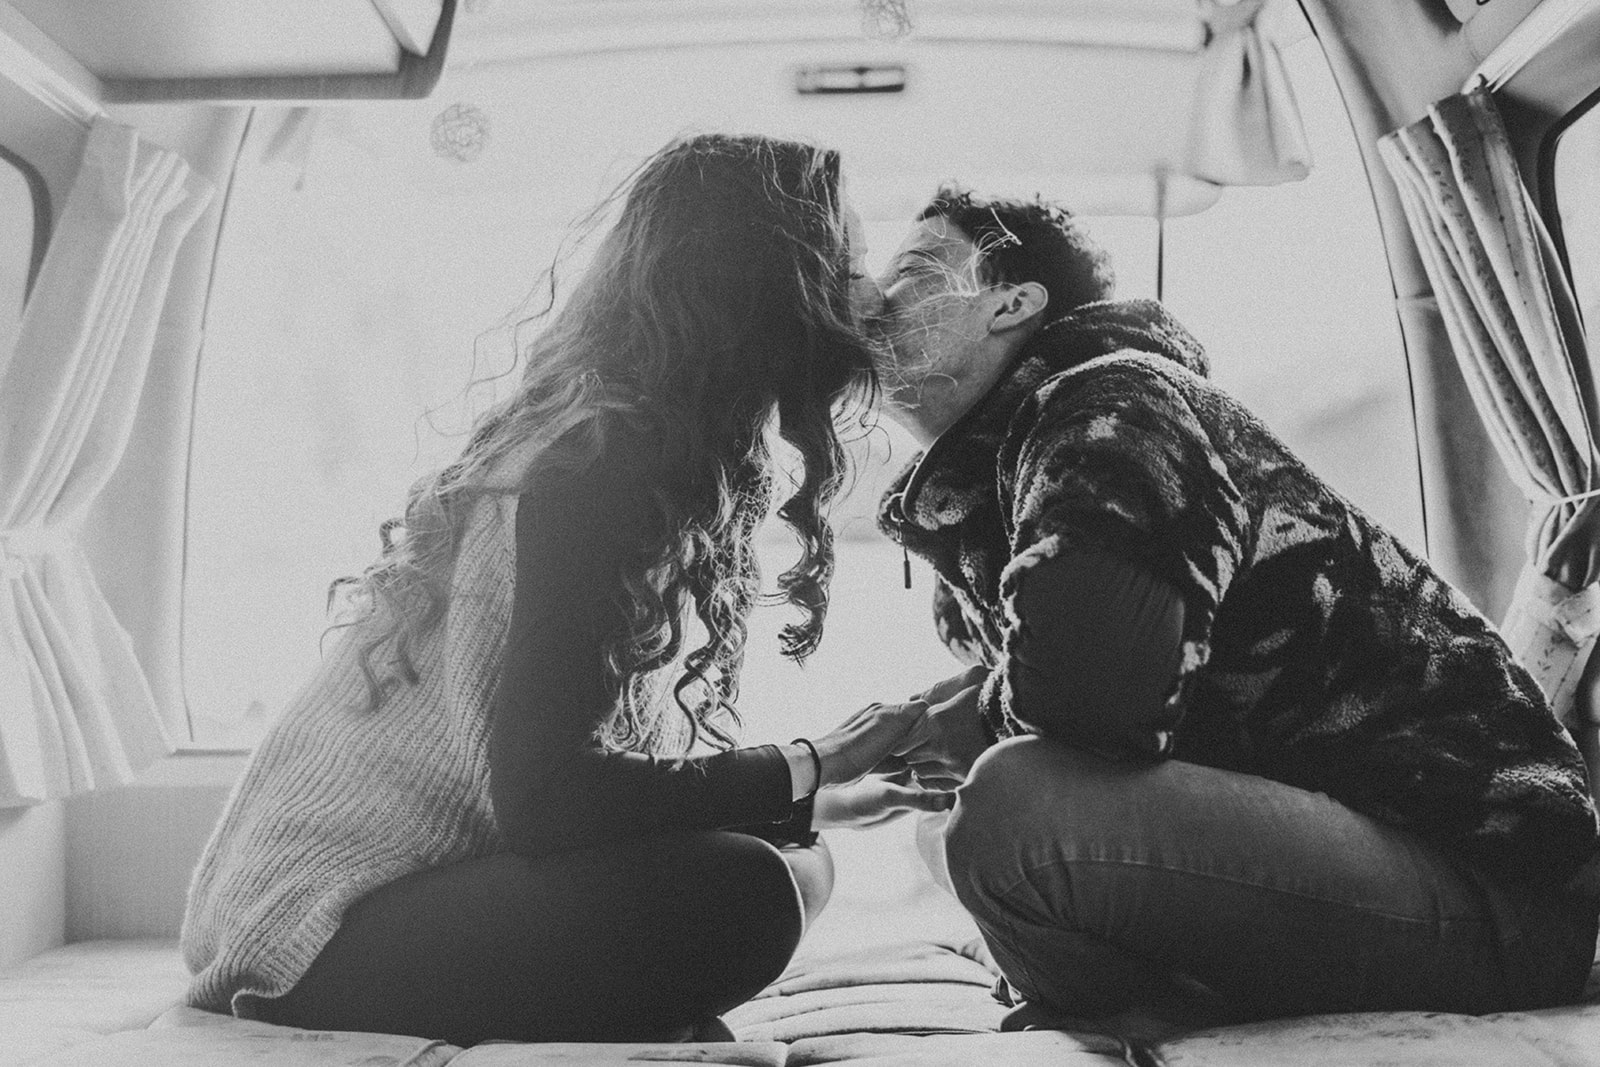 Cute camper van kiss engagement photos at Lillooet Lake, with Amie Le Blanc of Le Blanc Studio. Black and white. 